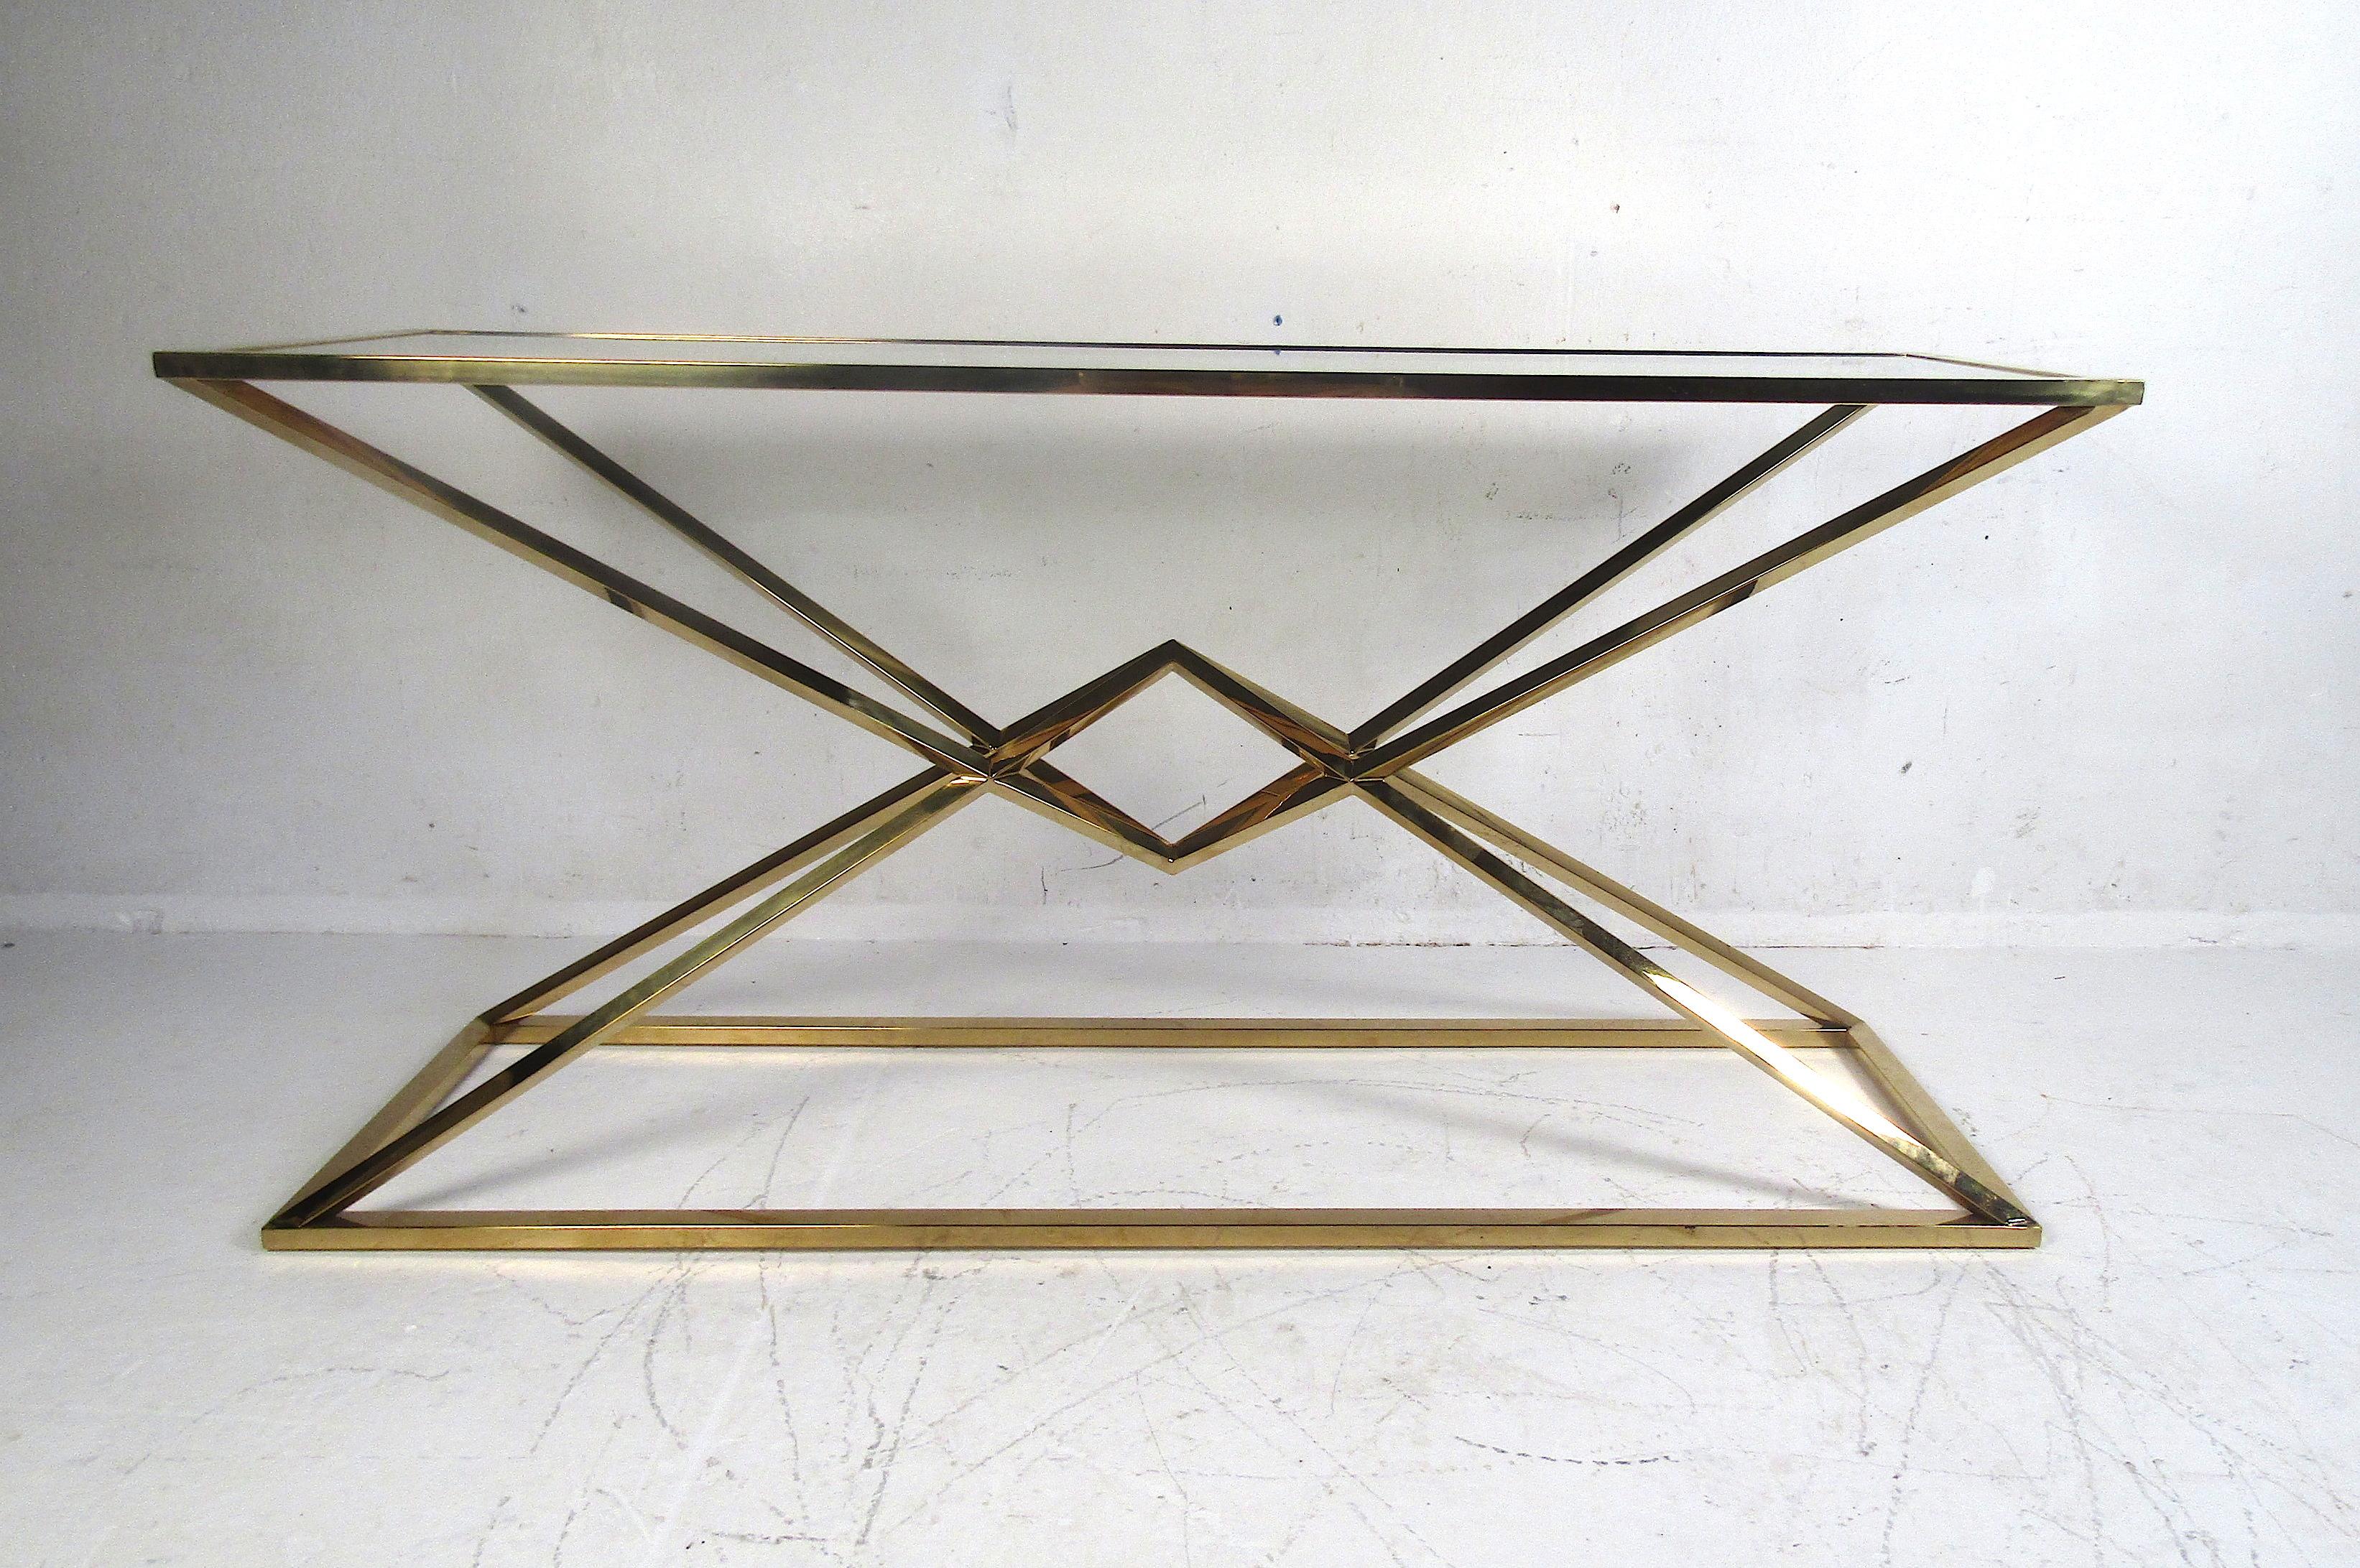 Impressive modern console table with a brass frame and glass insert serving as the tabletop. Interesting design with good metalwork. Sturdy piece with quite a bit of weight to it. This console/hallway table would make a notable addition to any